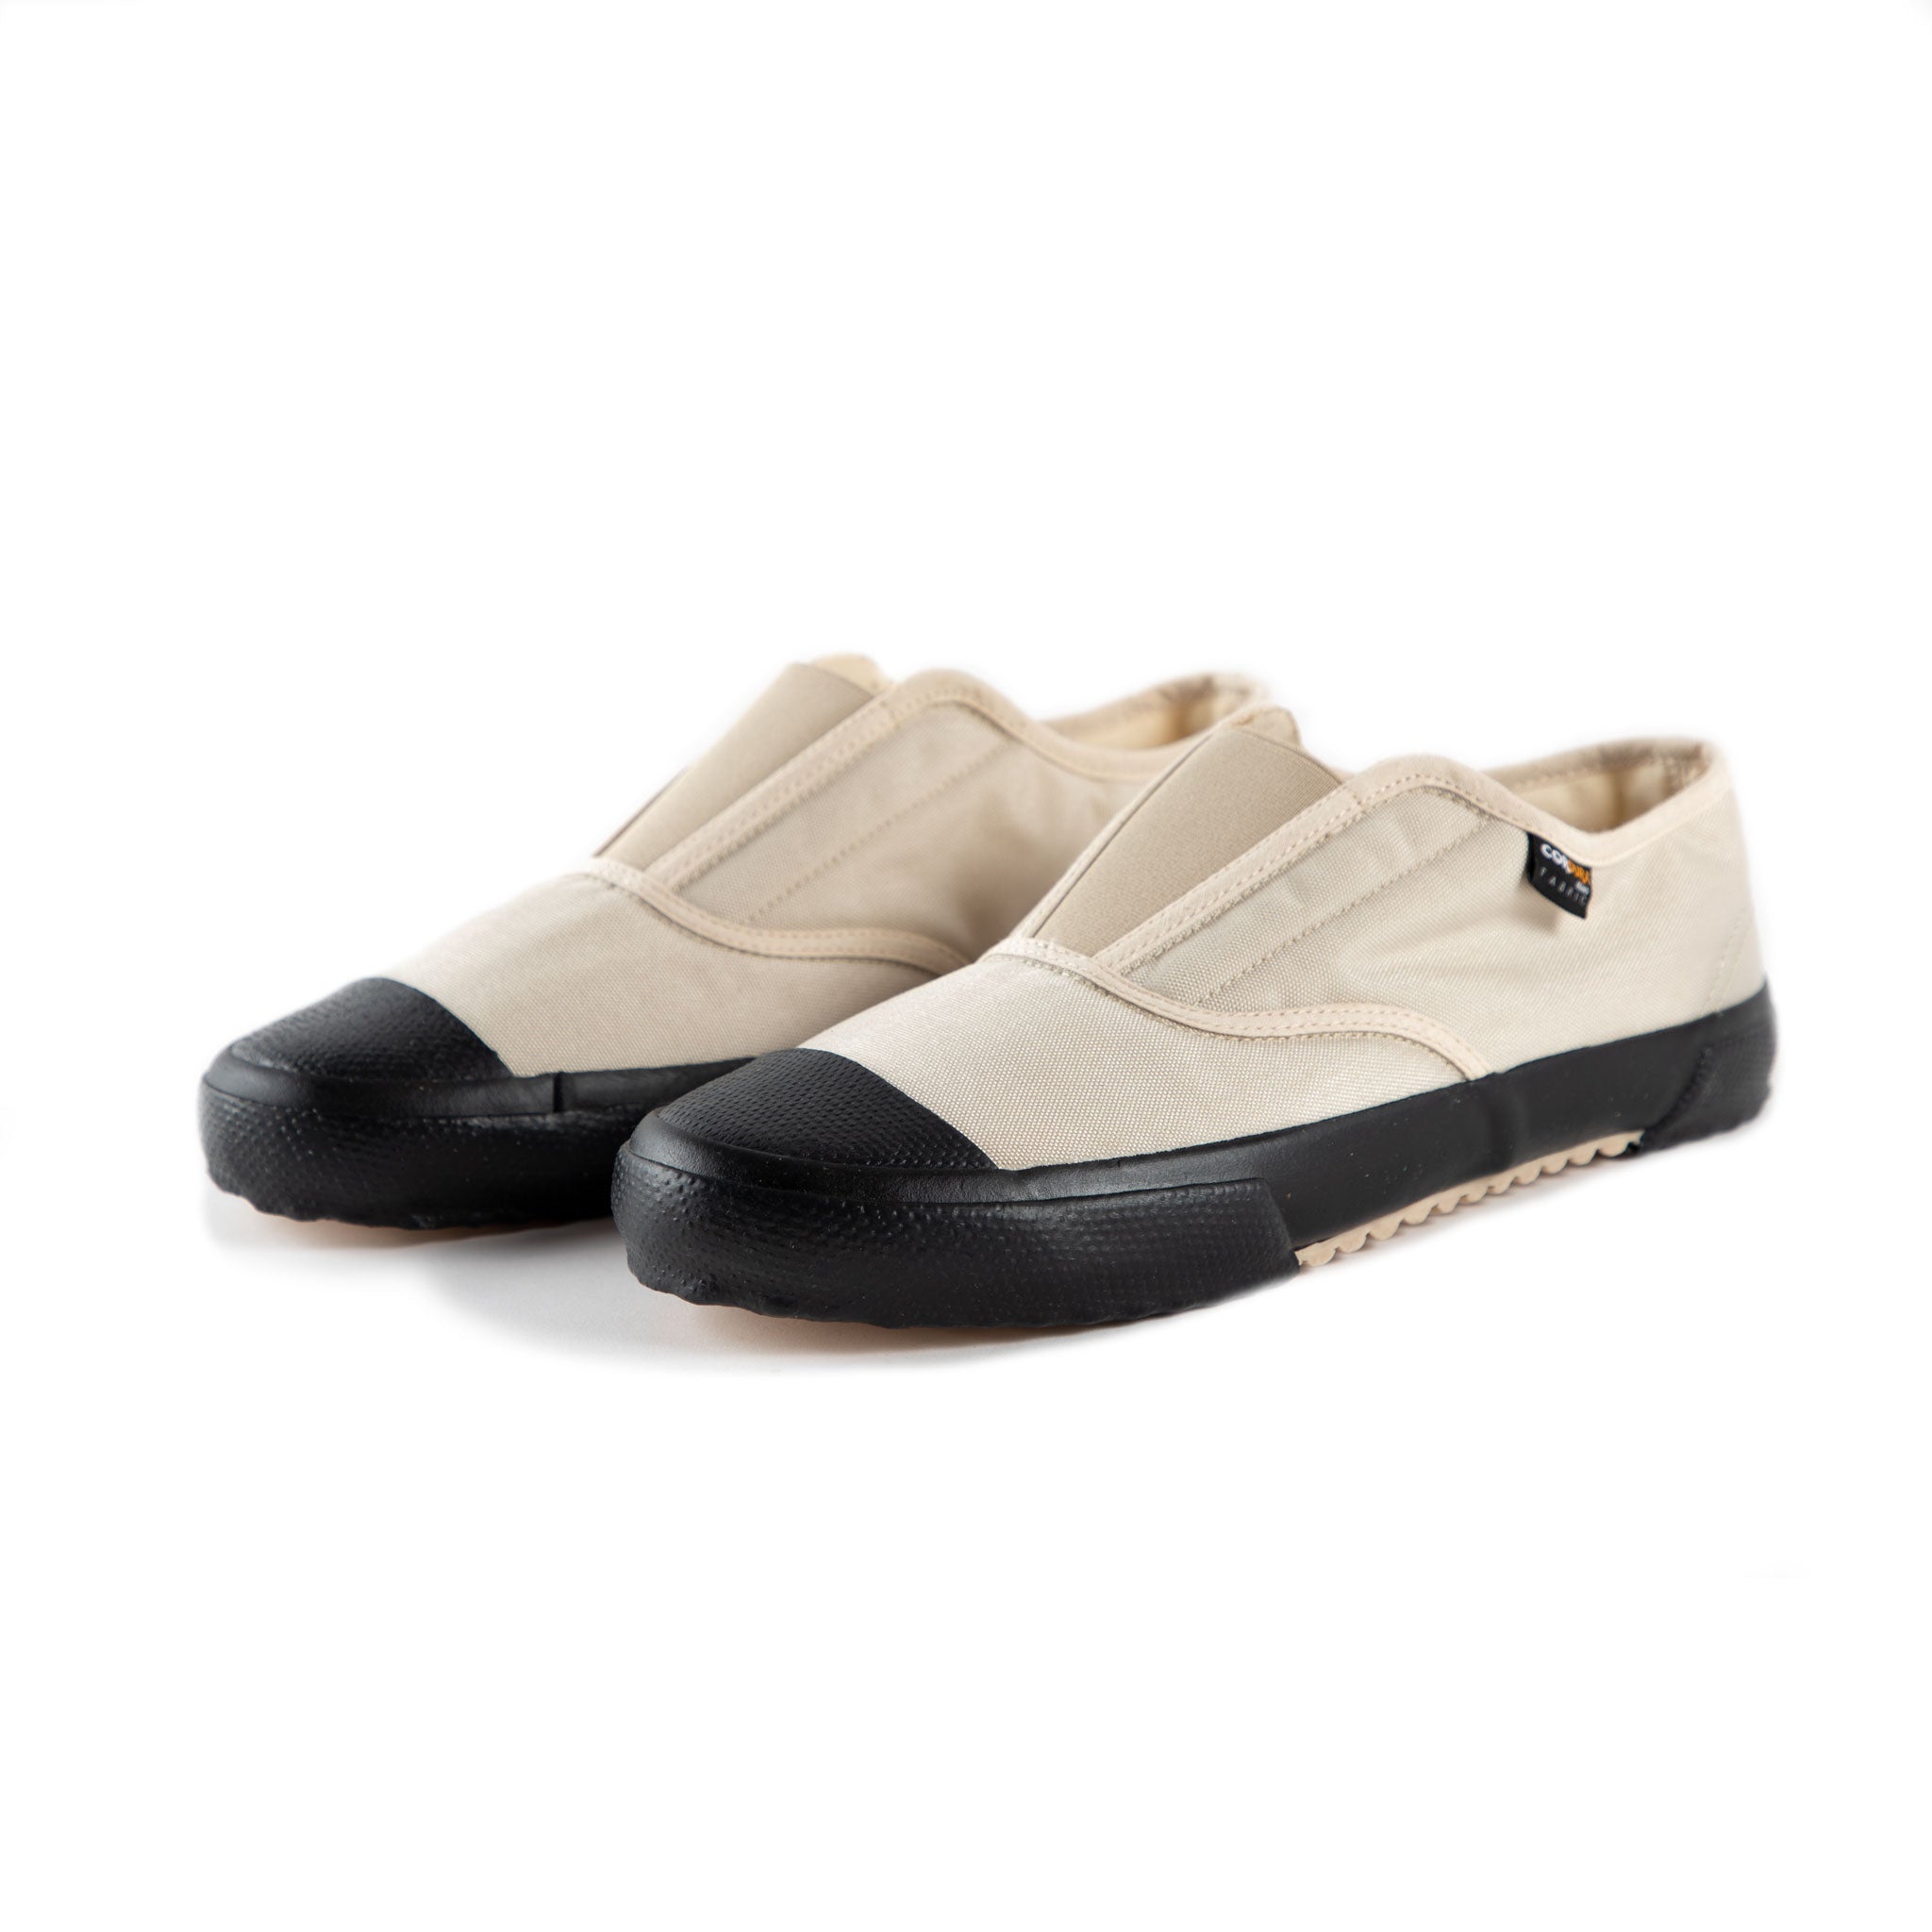 Reproduction of Found Italian Trainer - Natural/Black | Wallace